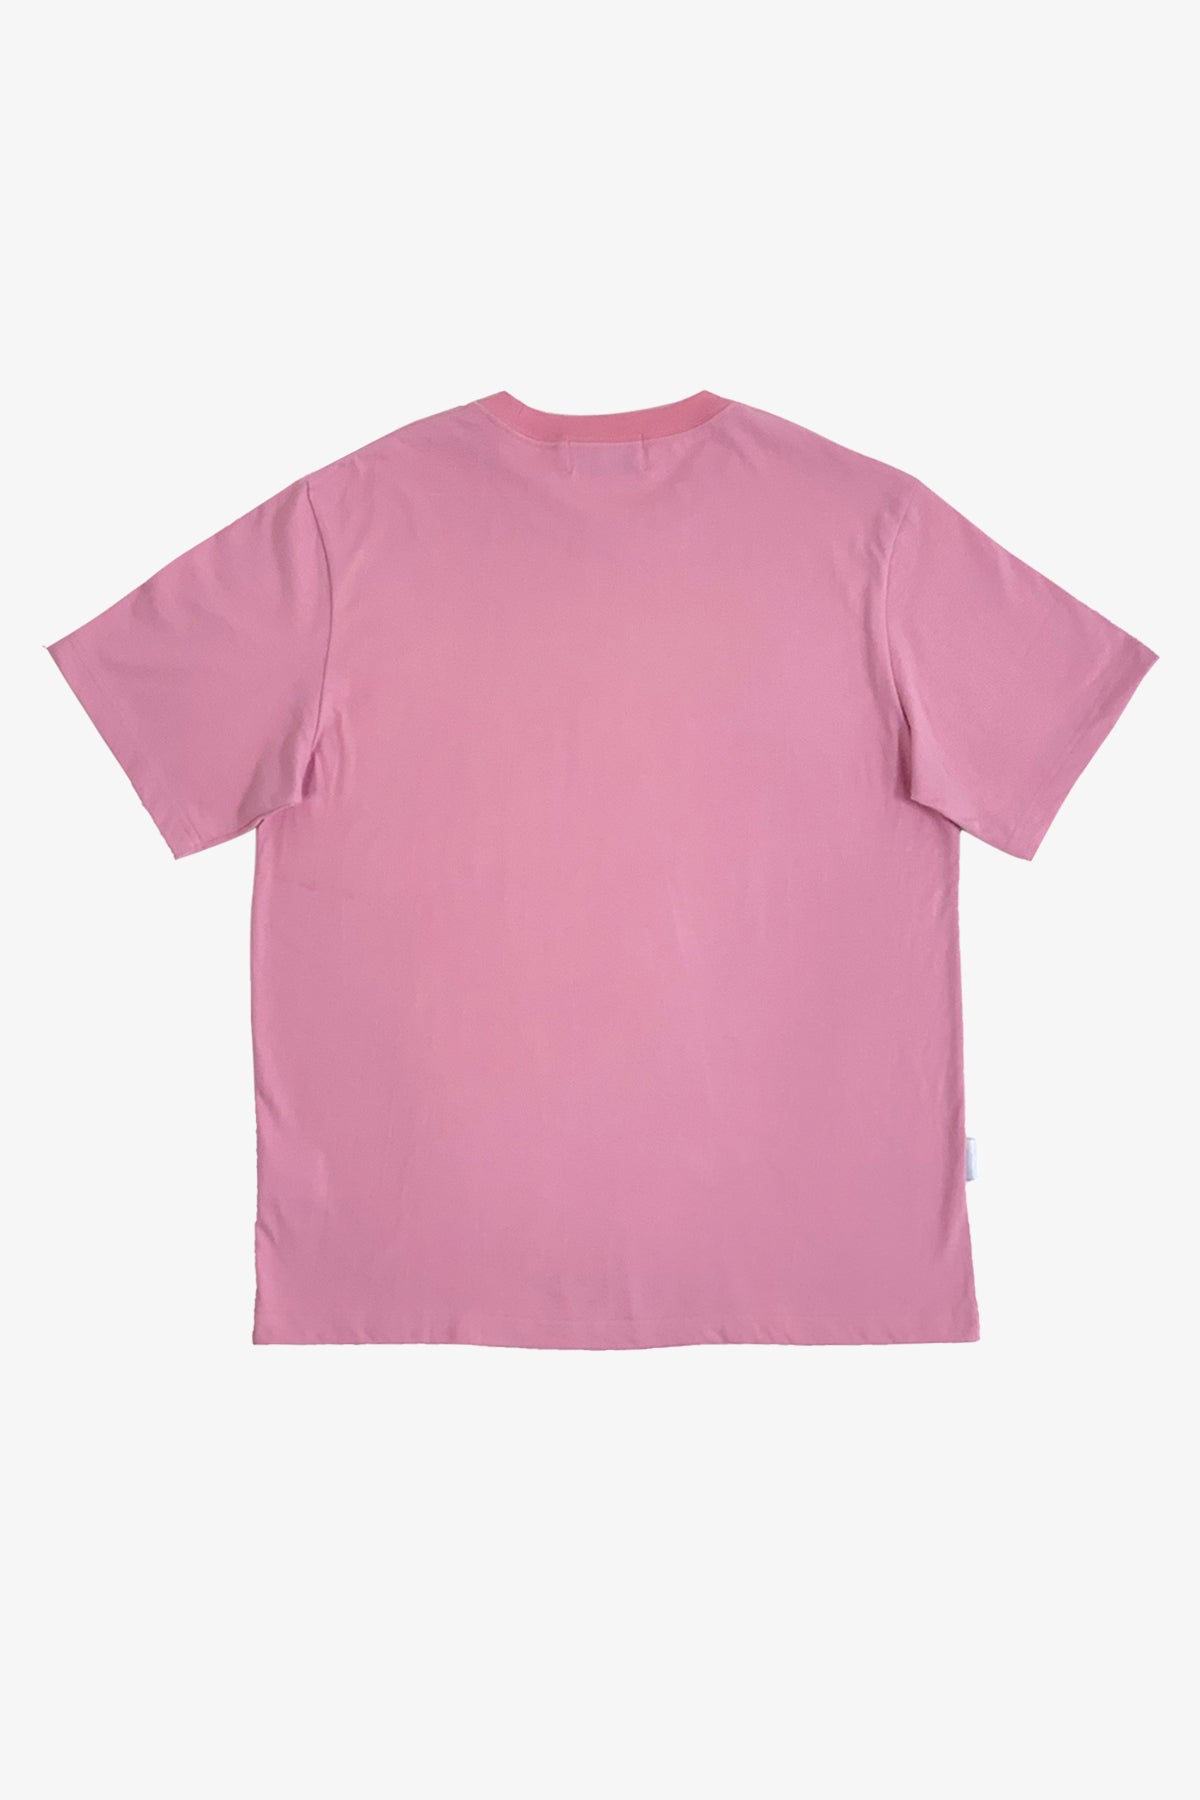 Dolphin Twins T-shirt - Pink Clouds